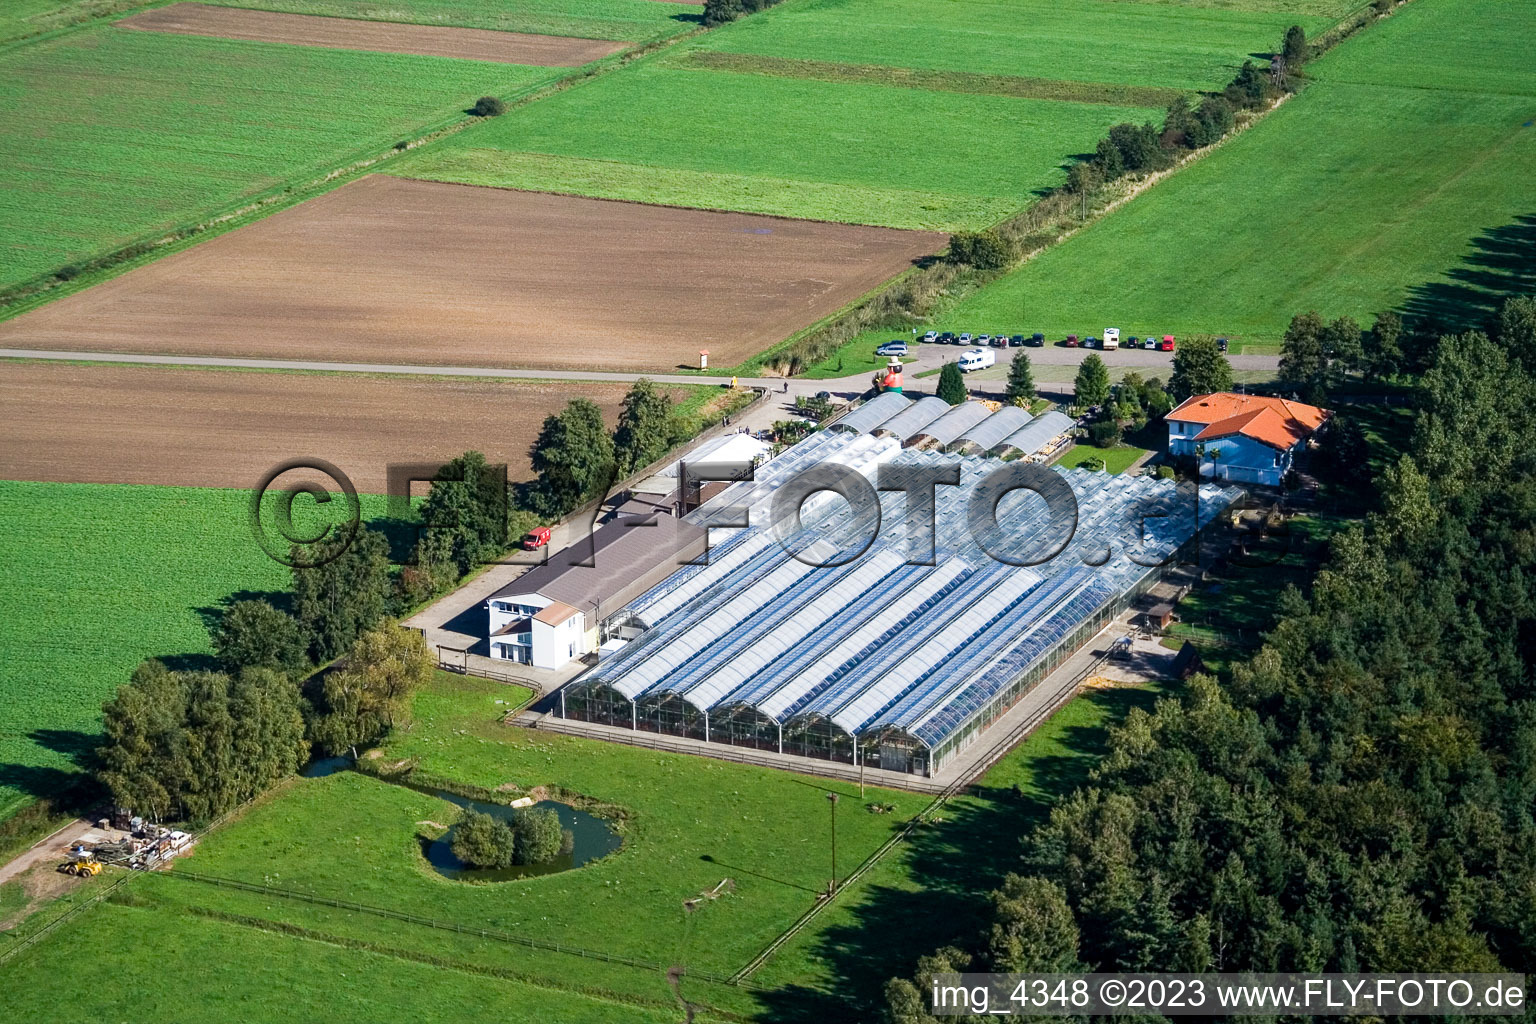 Aerial photograpy of Cactusland in Steinfeld in the state Rhineland-Palatinate, Germany